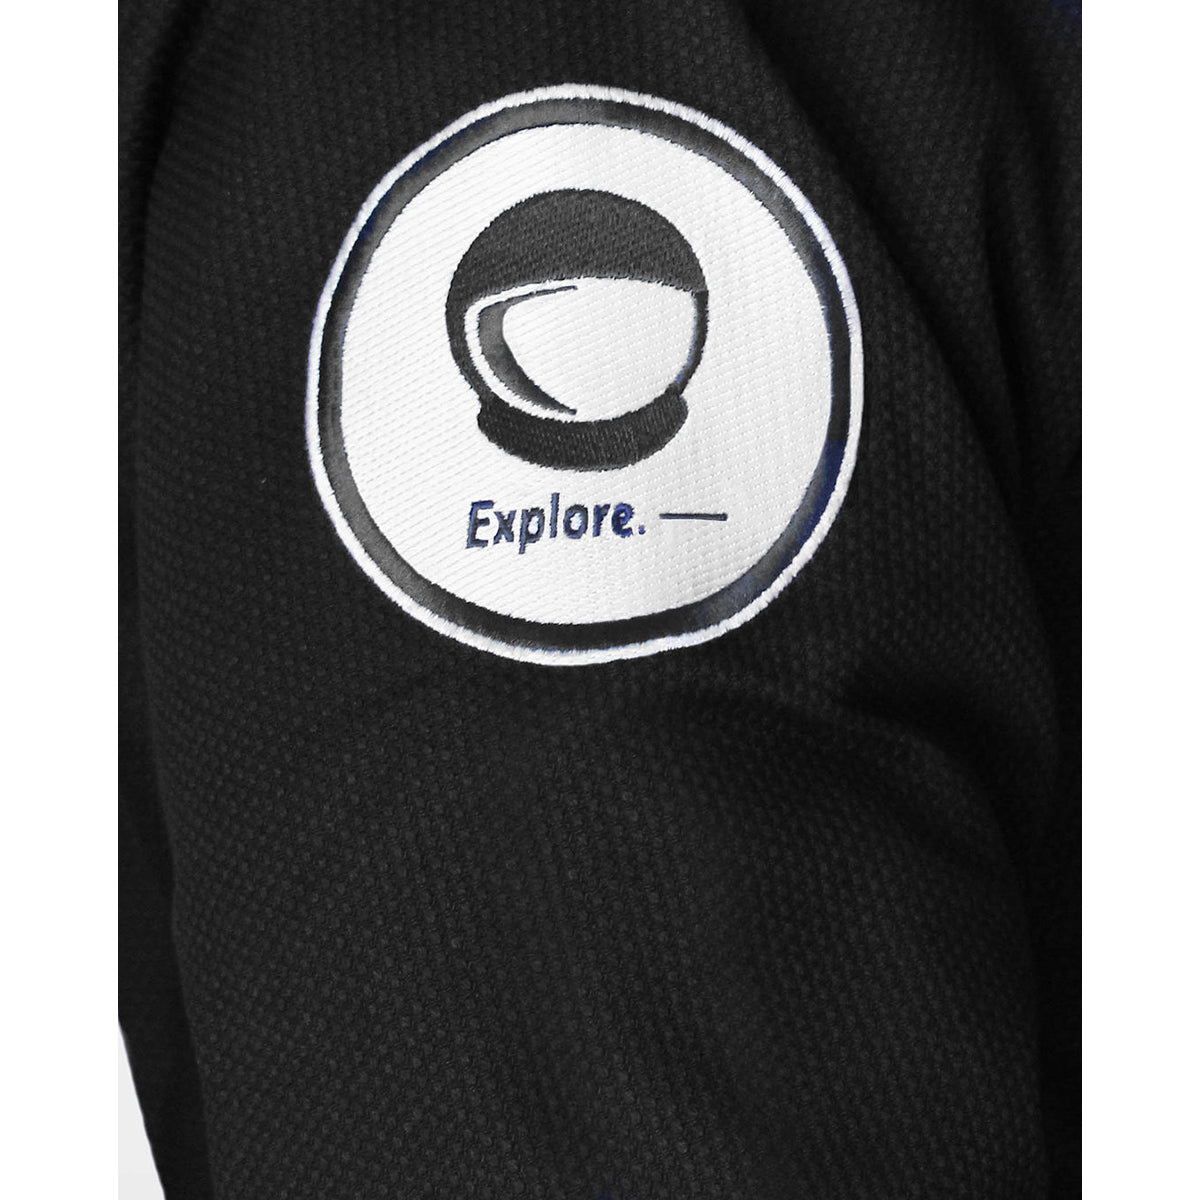 Chaos and Order Explorer Series Astronaut BJJ Gi - Black Chaos and Order